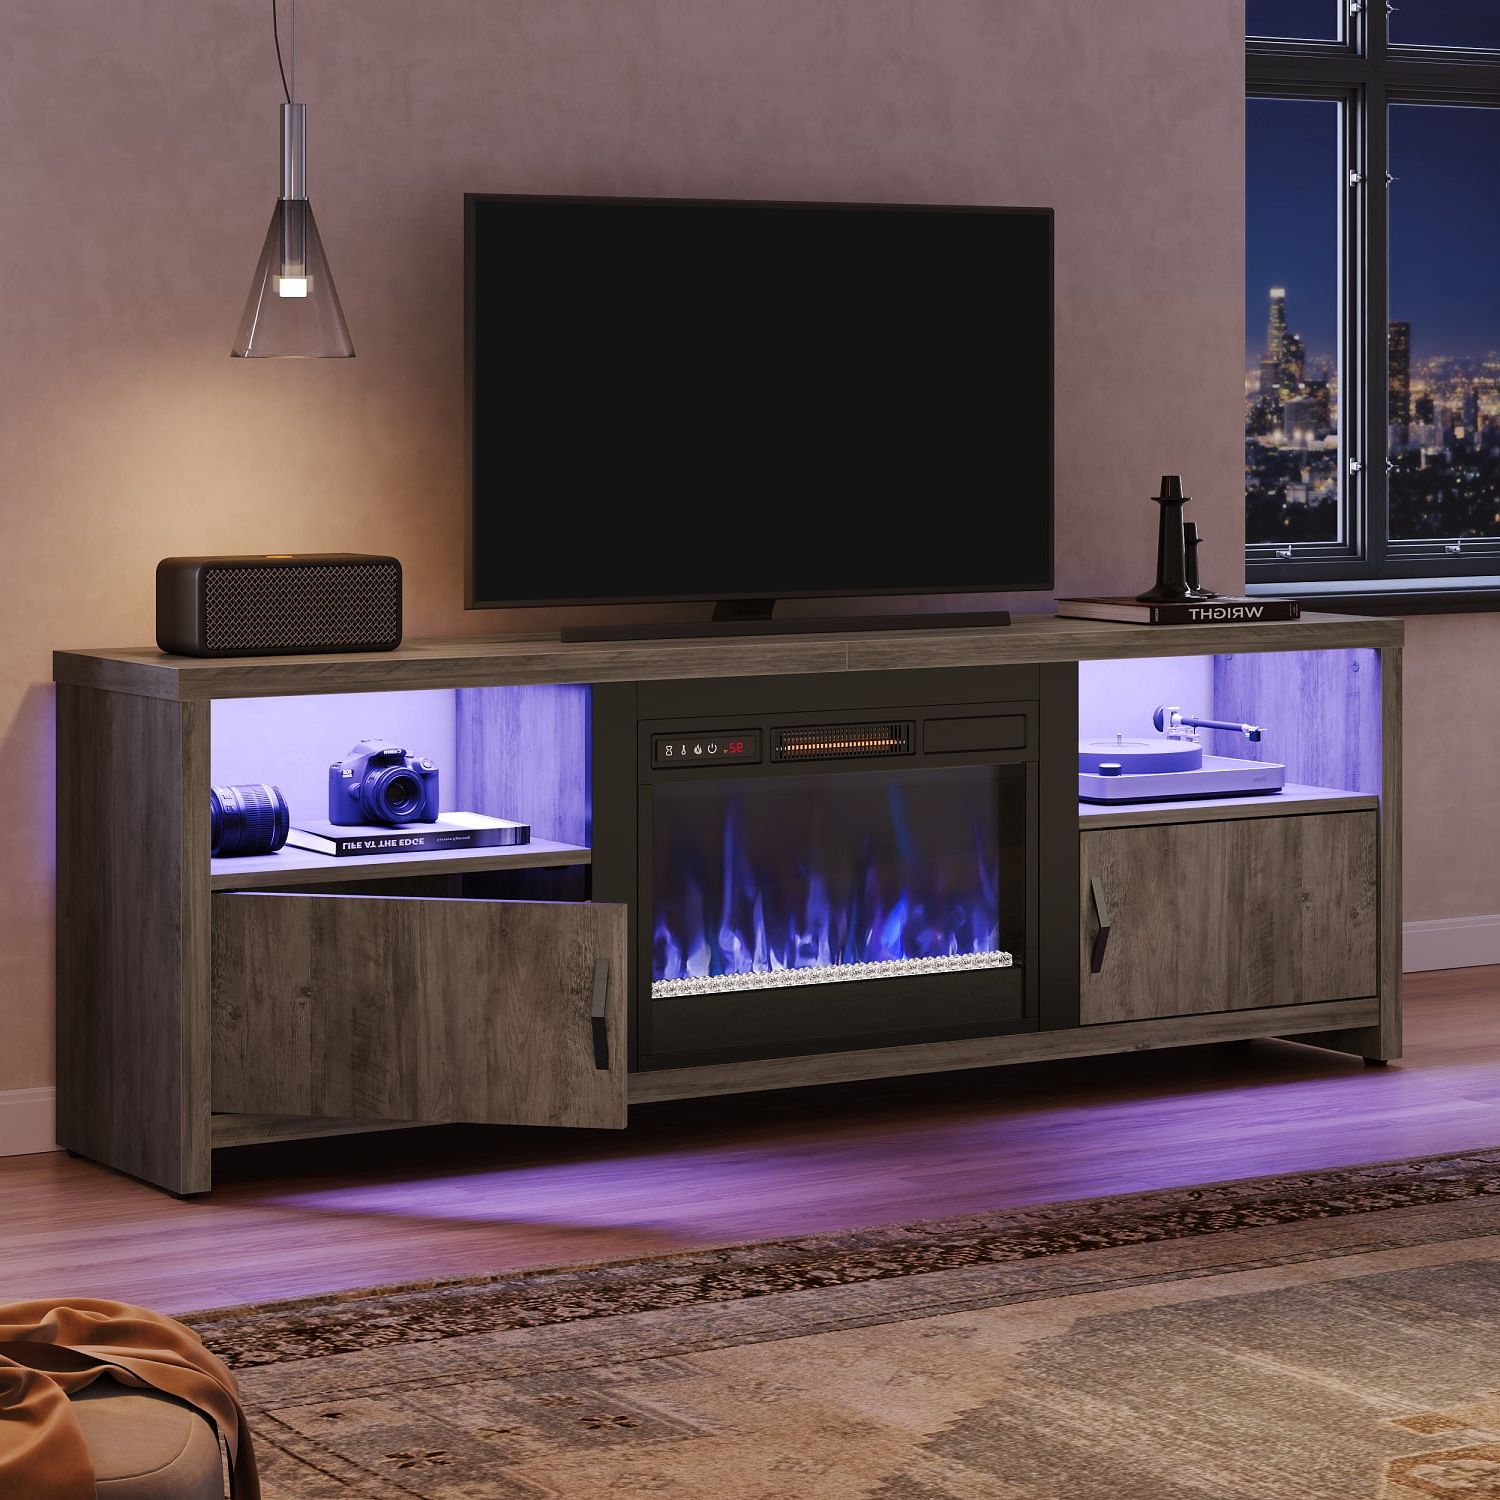 Best And Newest Bestier Tv Stand For Tvs Up To 75" Throughout Bestier Electric Fireplace Tv Stand For Tvs Up To 75" Entertainment (View 11 of 15)